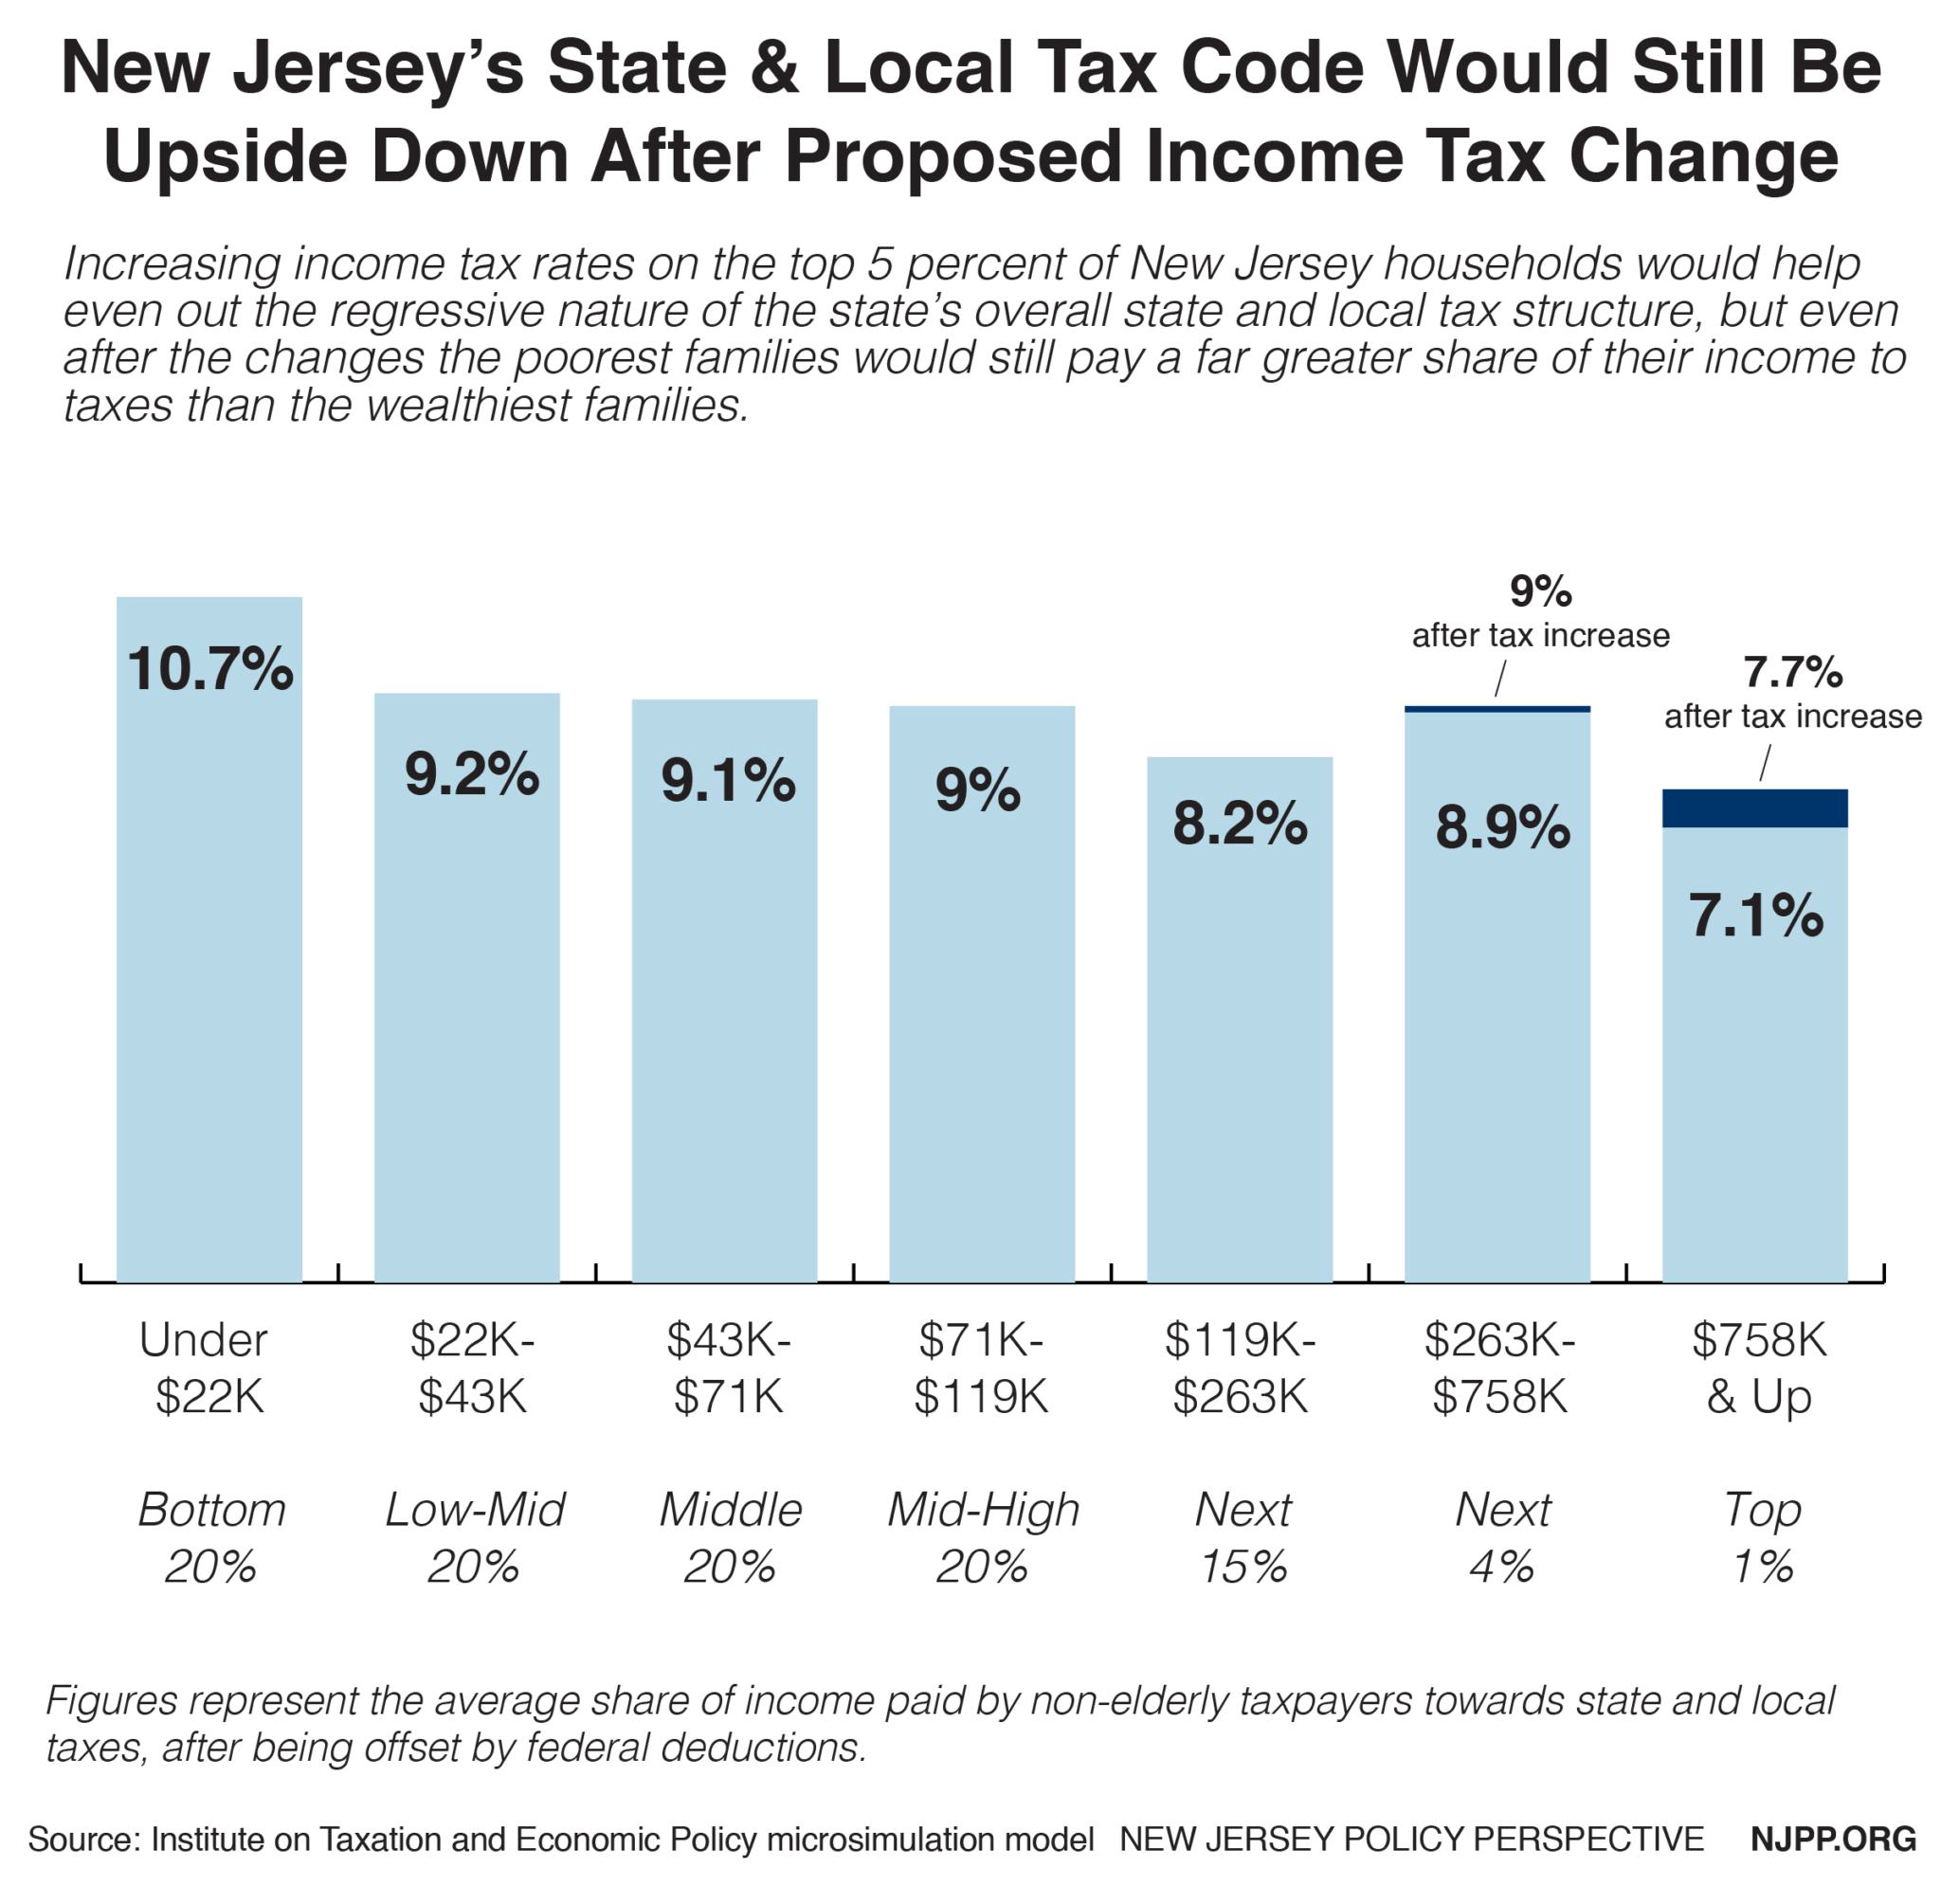 Reforming New Jersey’s Tax Would Help Build Shared Prosperity